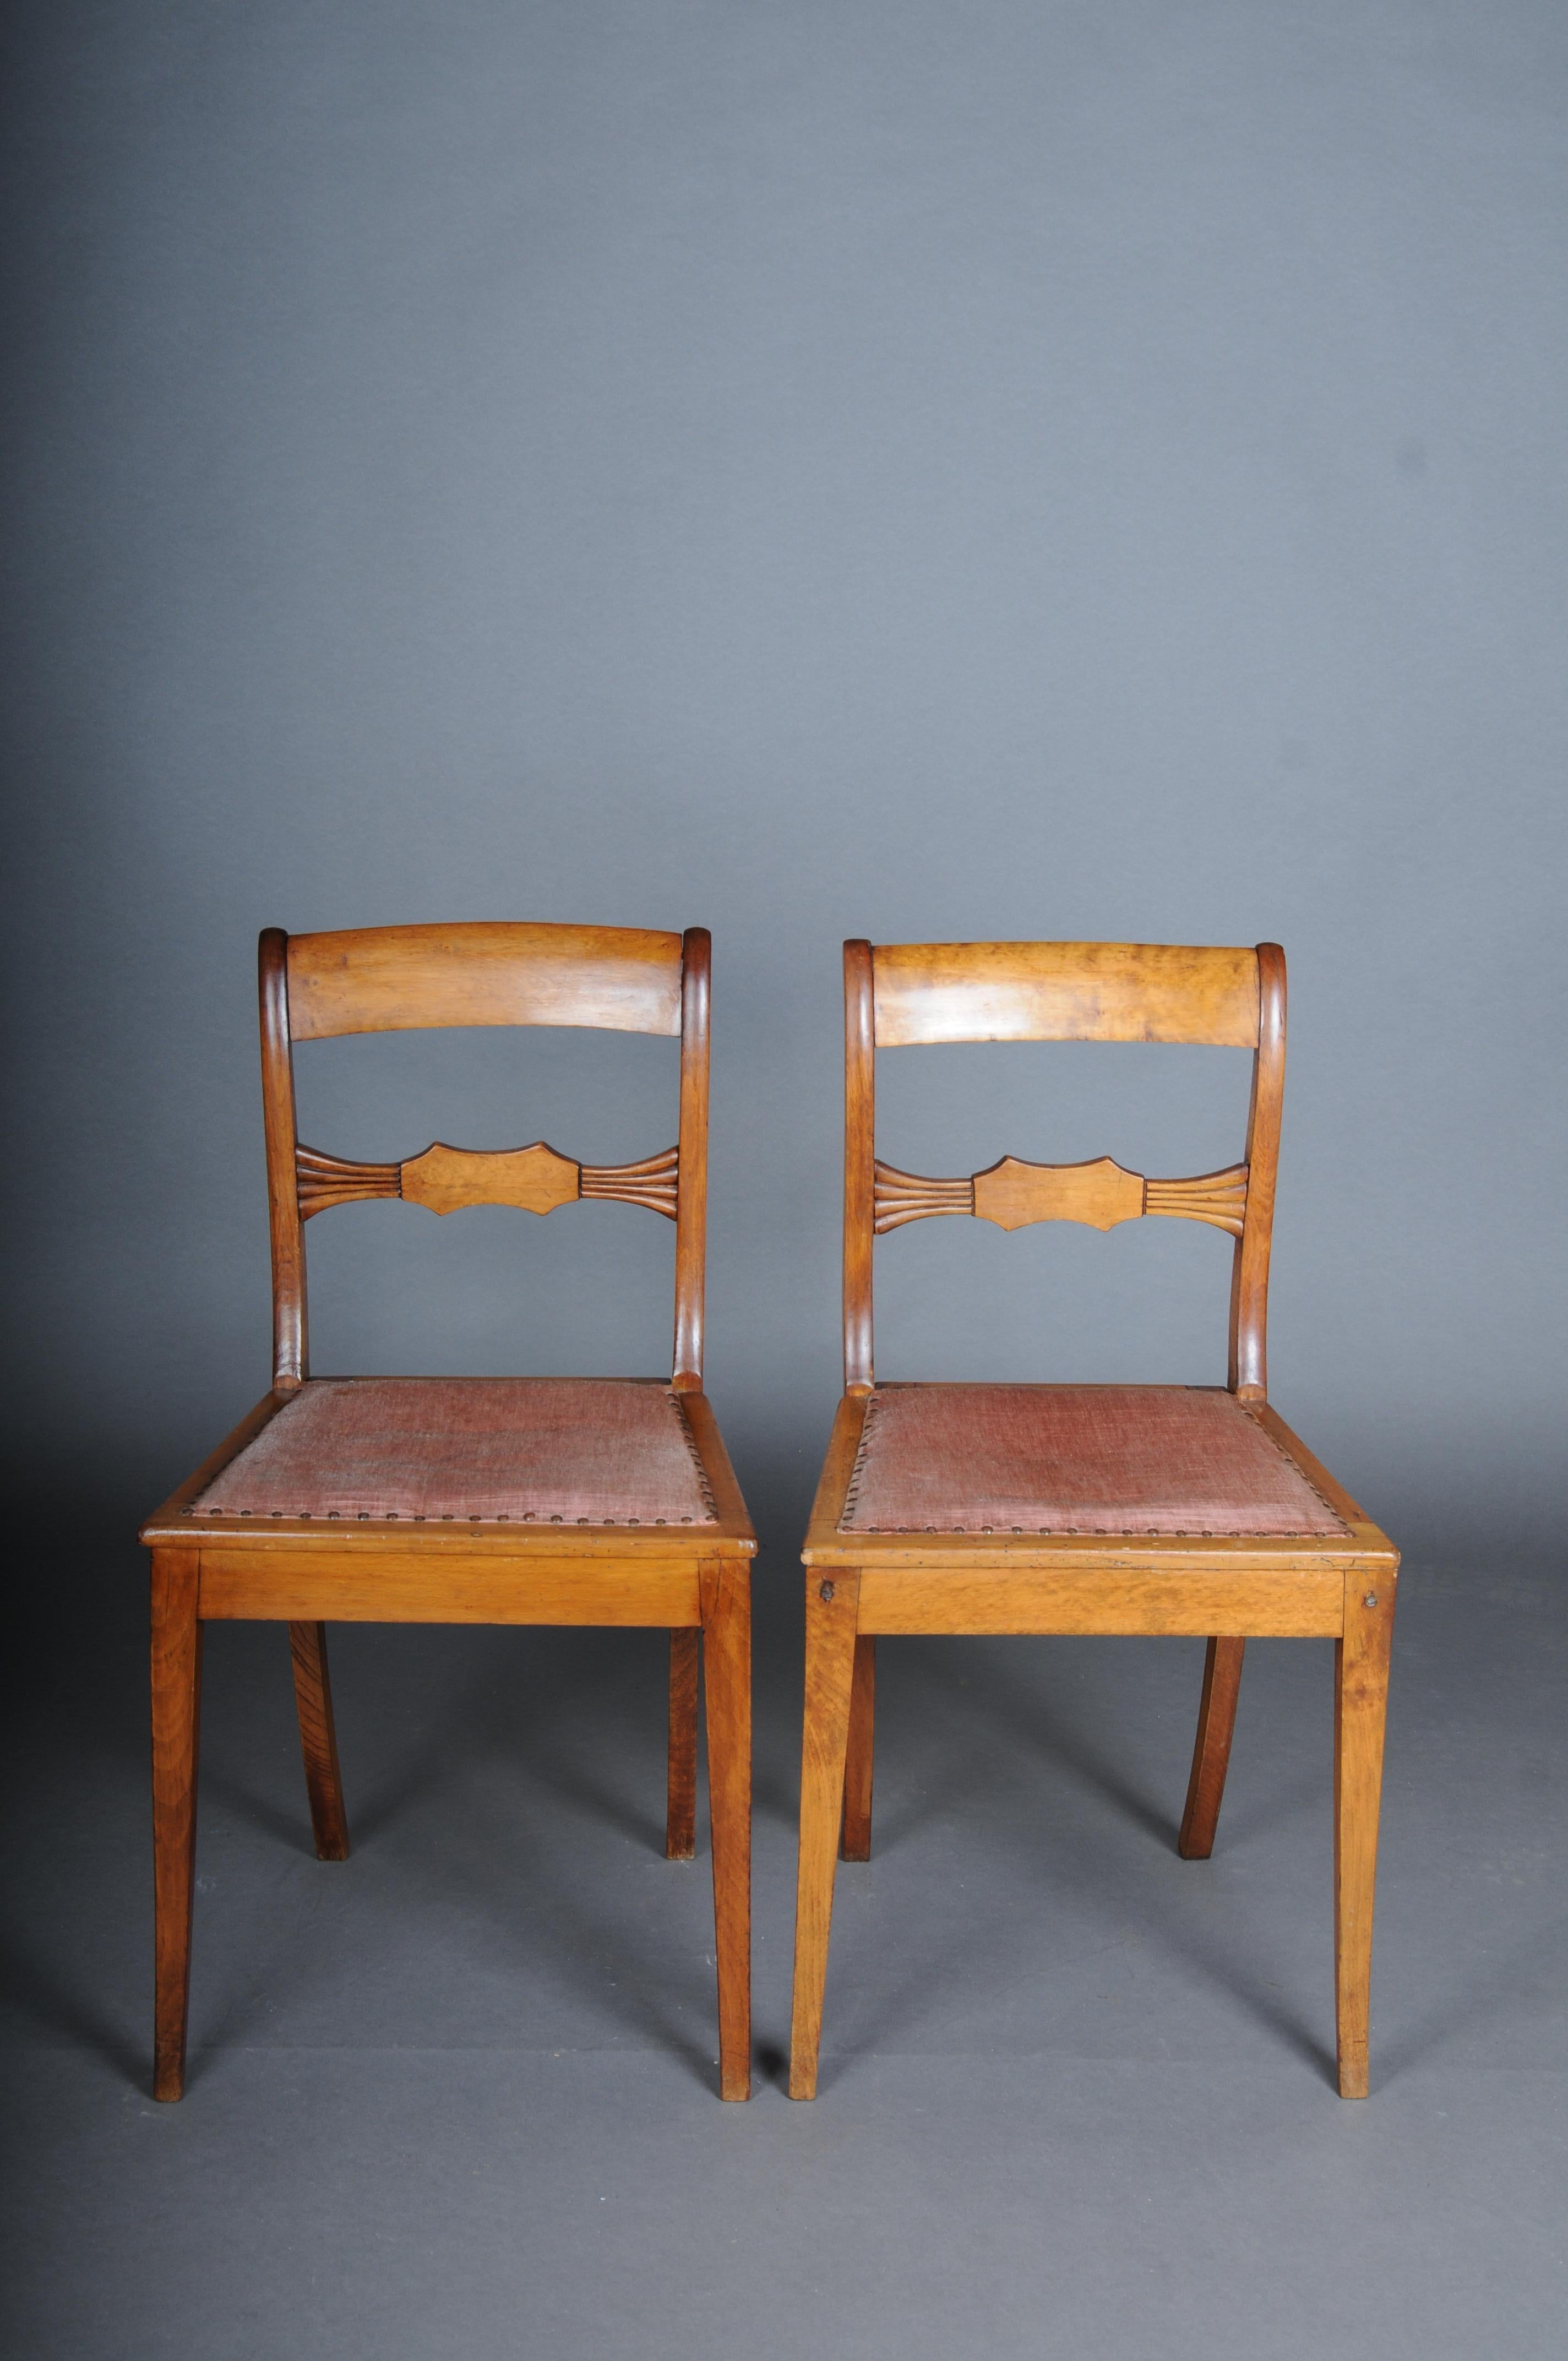 Pair (2) antique Biedermeier chairs circa 1840, birch

Solid birch wood body. Seat cushion upholstered and covered with fabric. Grand-line frame and legs. Slightly curved backrest with partly grooved carving.
Germany, Biedermeier around 1840